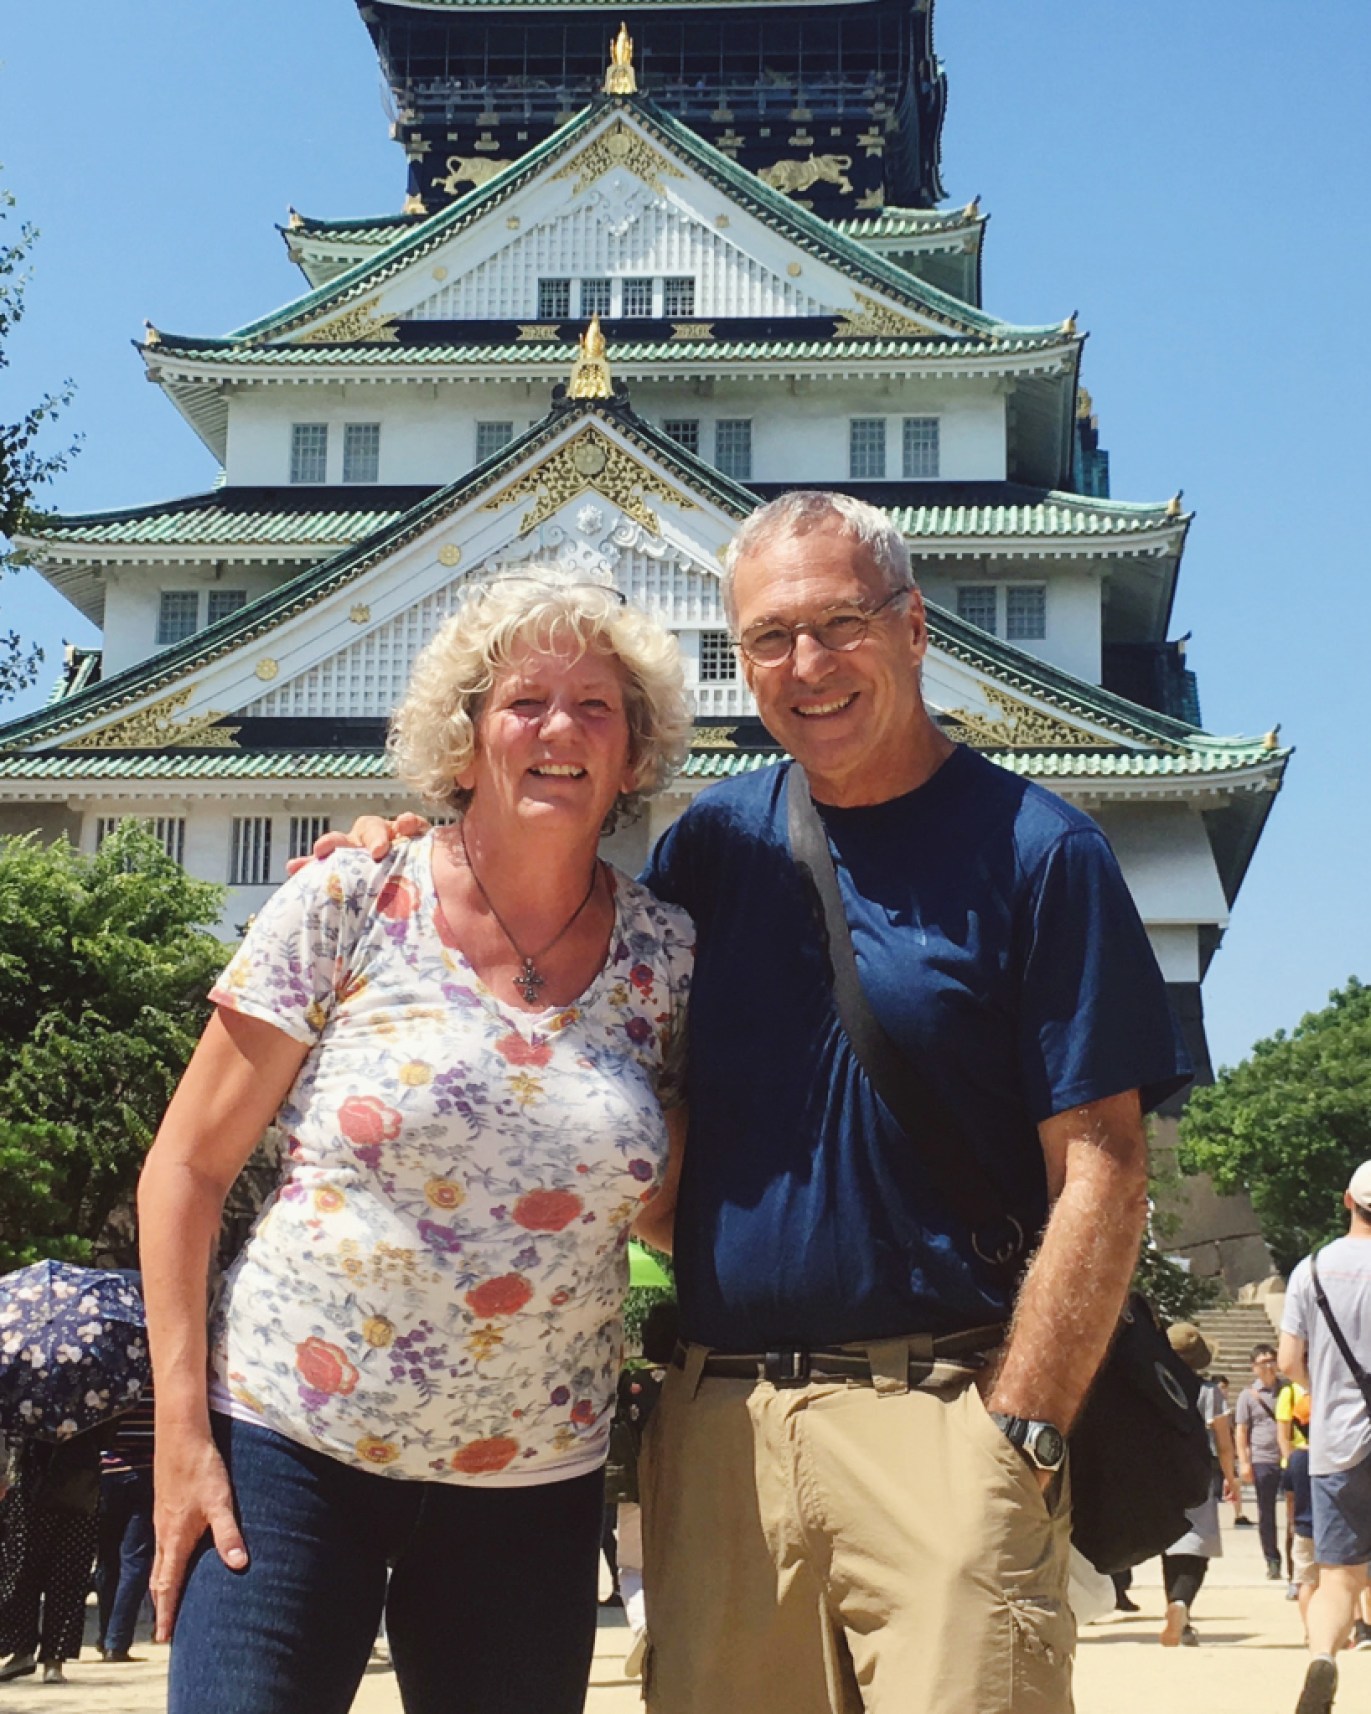 Michael and Debbie, the Senior Nomads standing in front of a monument on one of their trips.